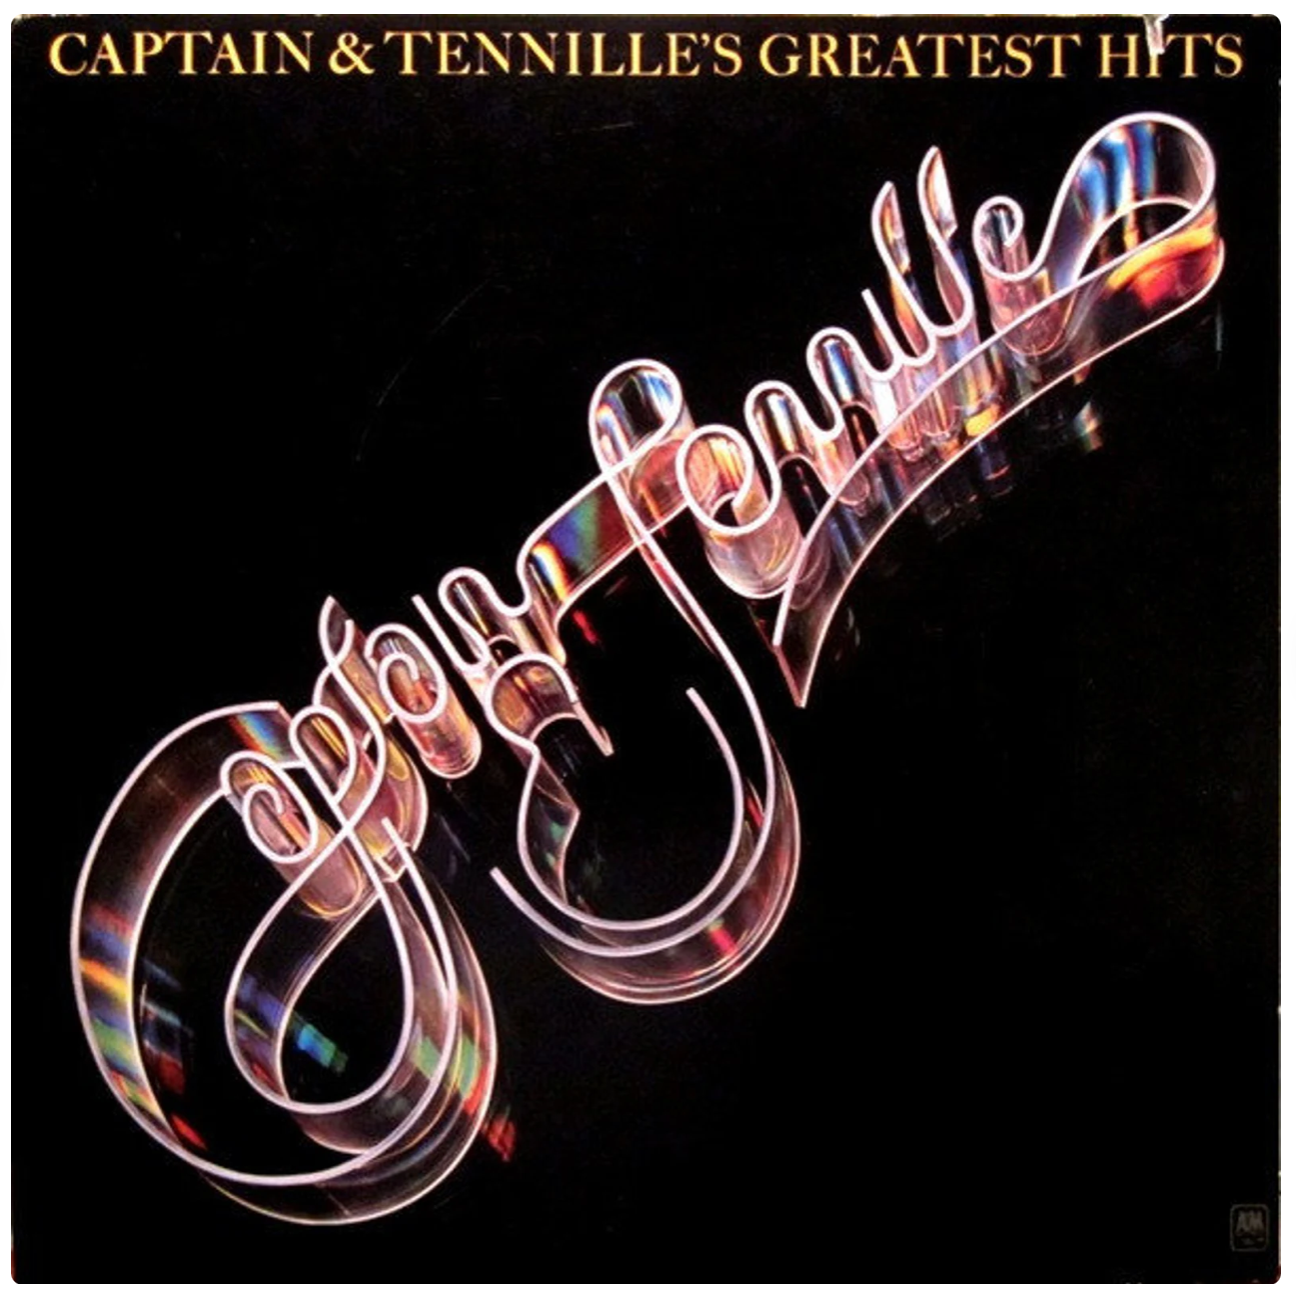 Album cover with black background and "Captain & Tennille" in 3D acrylic letters.